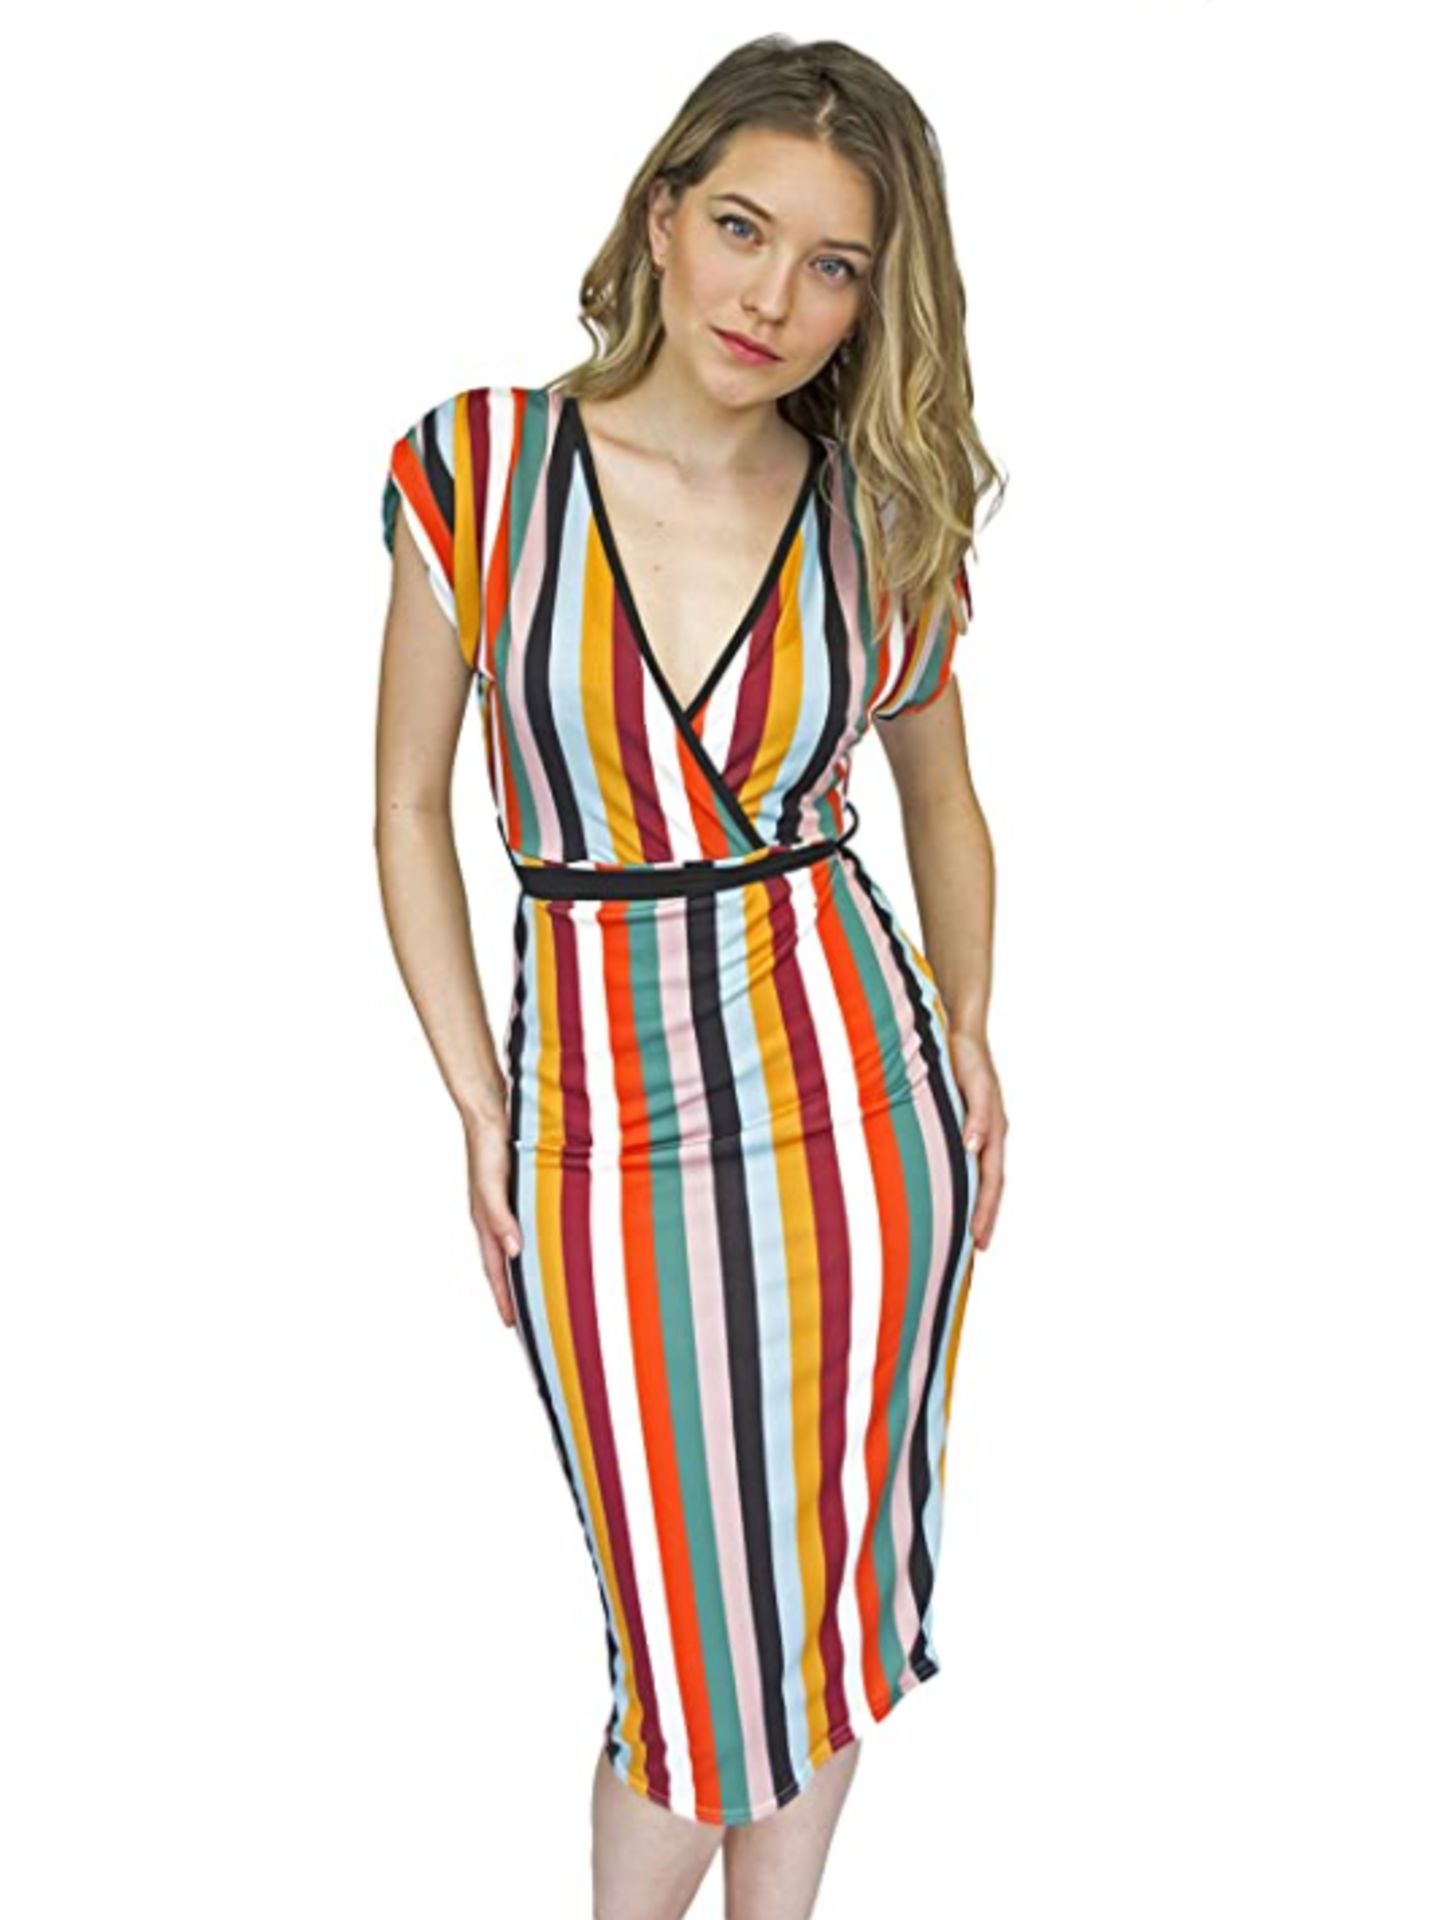 30 x New Women's Party Going Out Dresses Clothing Ladieswear Fashion Mini Maxi Styles - Image 5 of 5